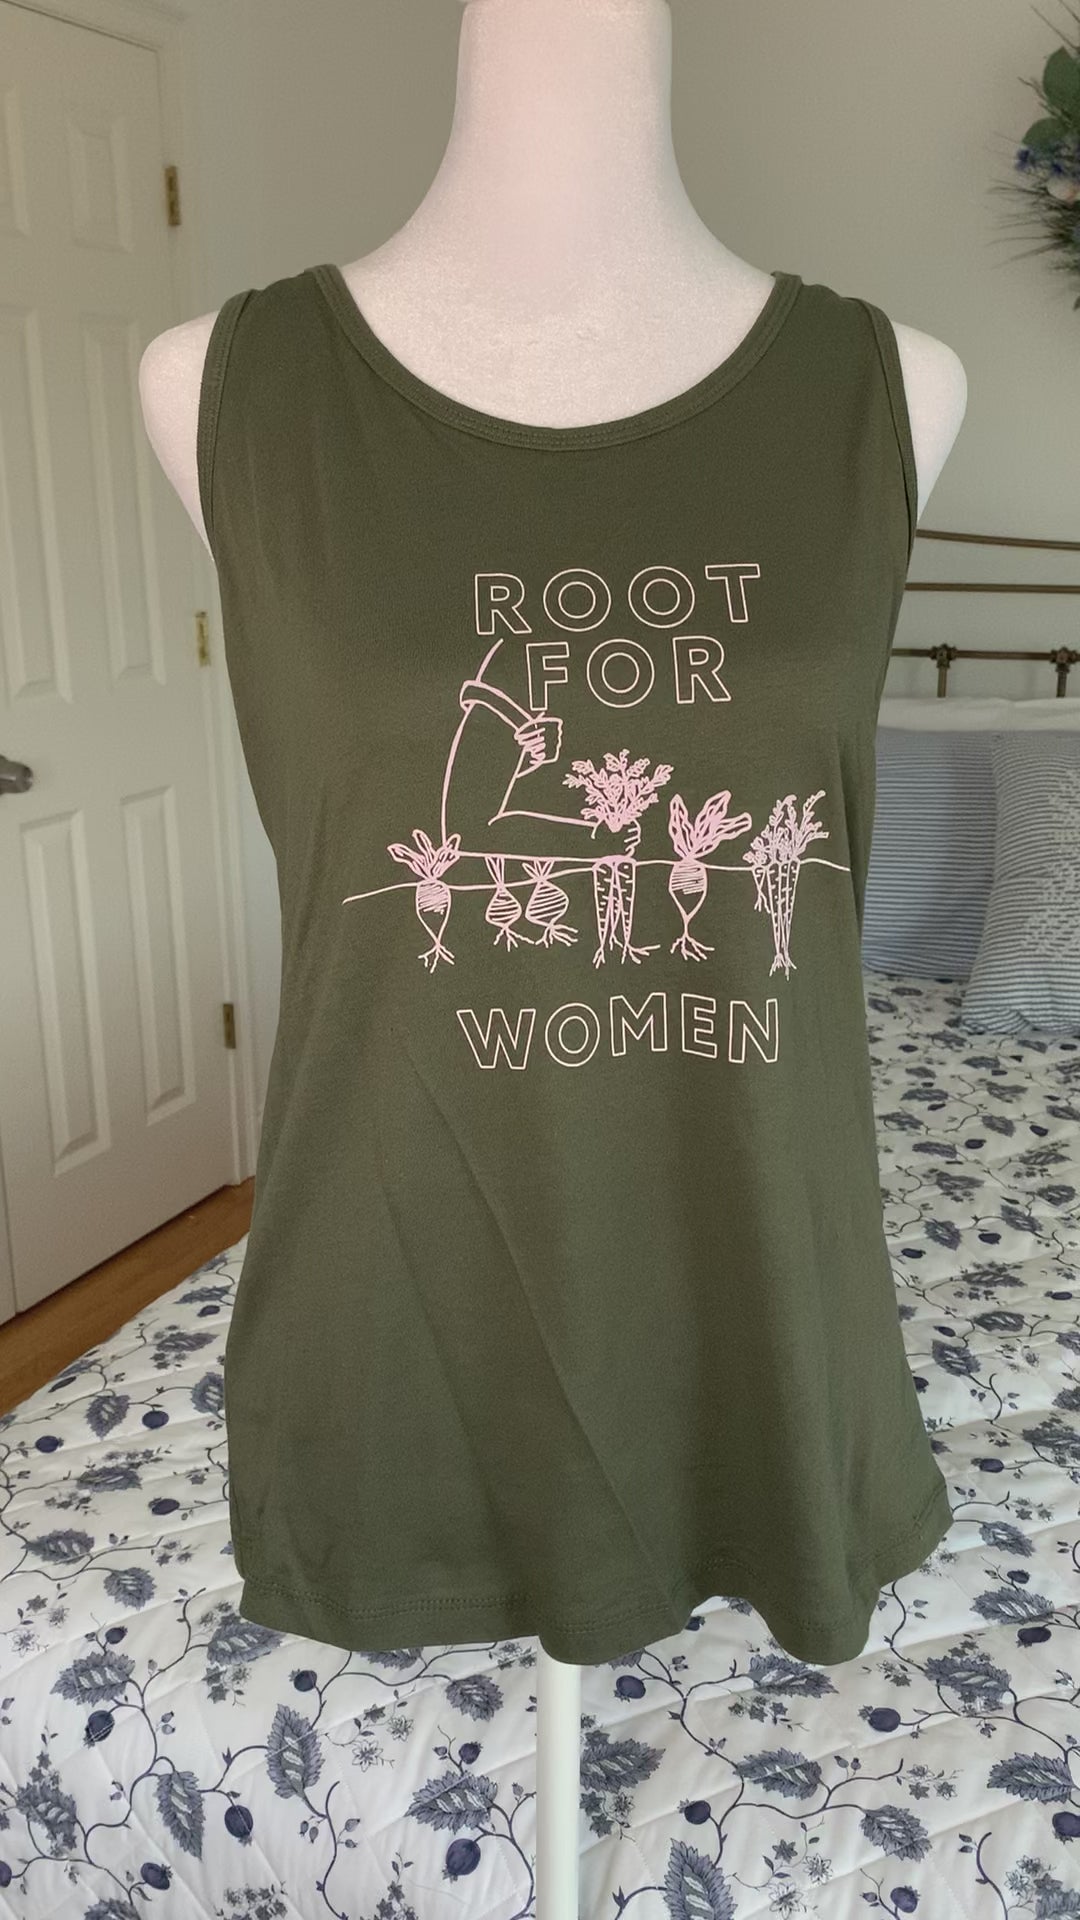 An olive green tank that reads "Root for Women" hangs on a manikin